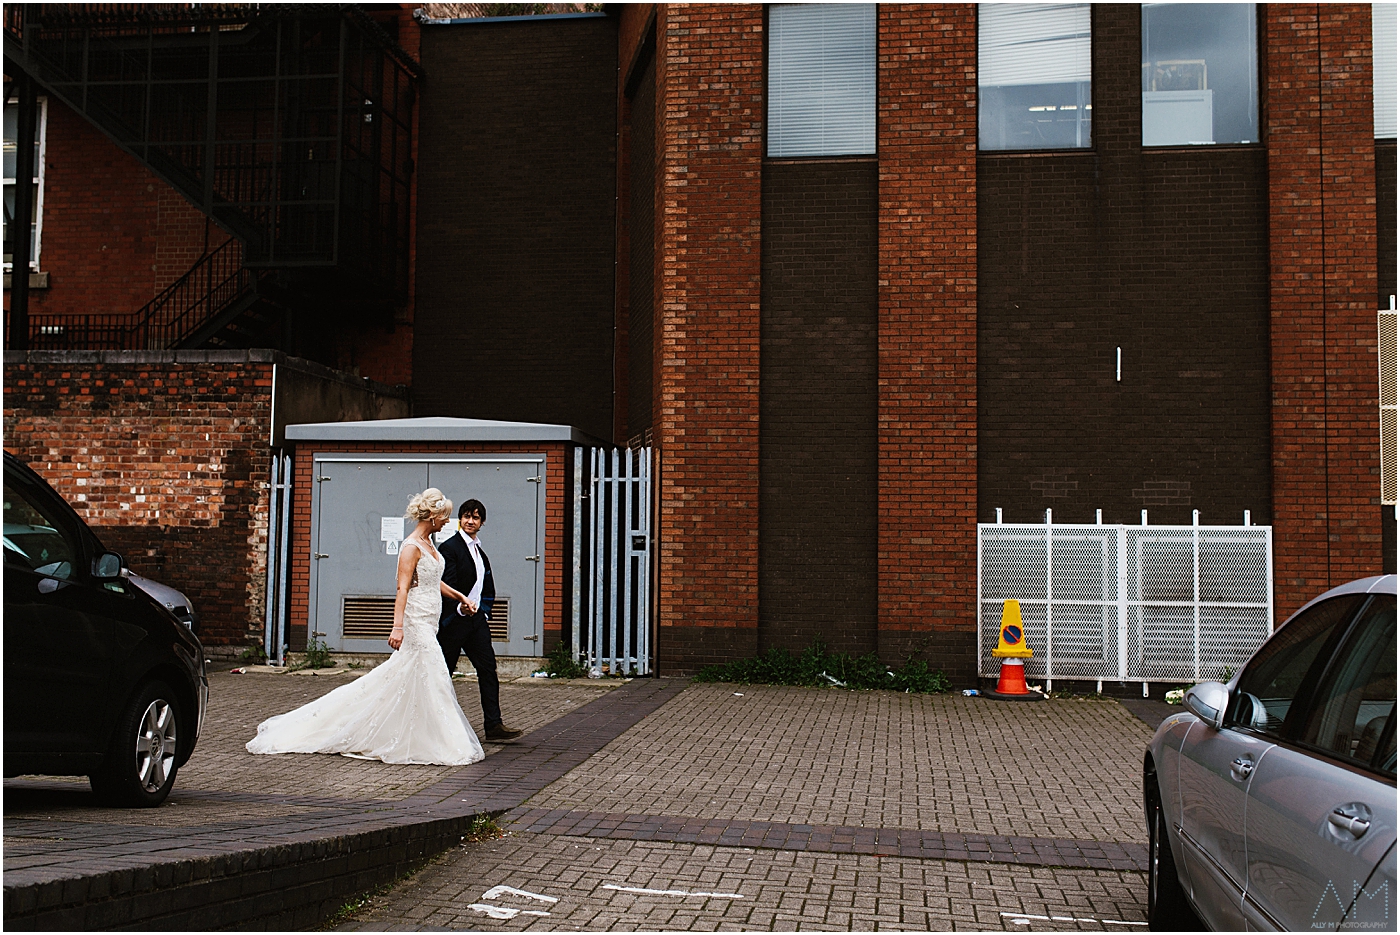 Natural wedding photography in Manchester